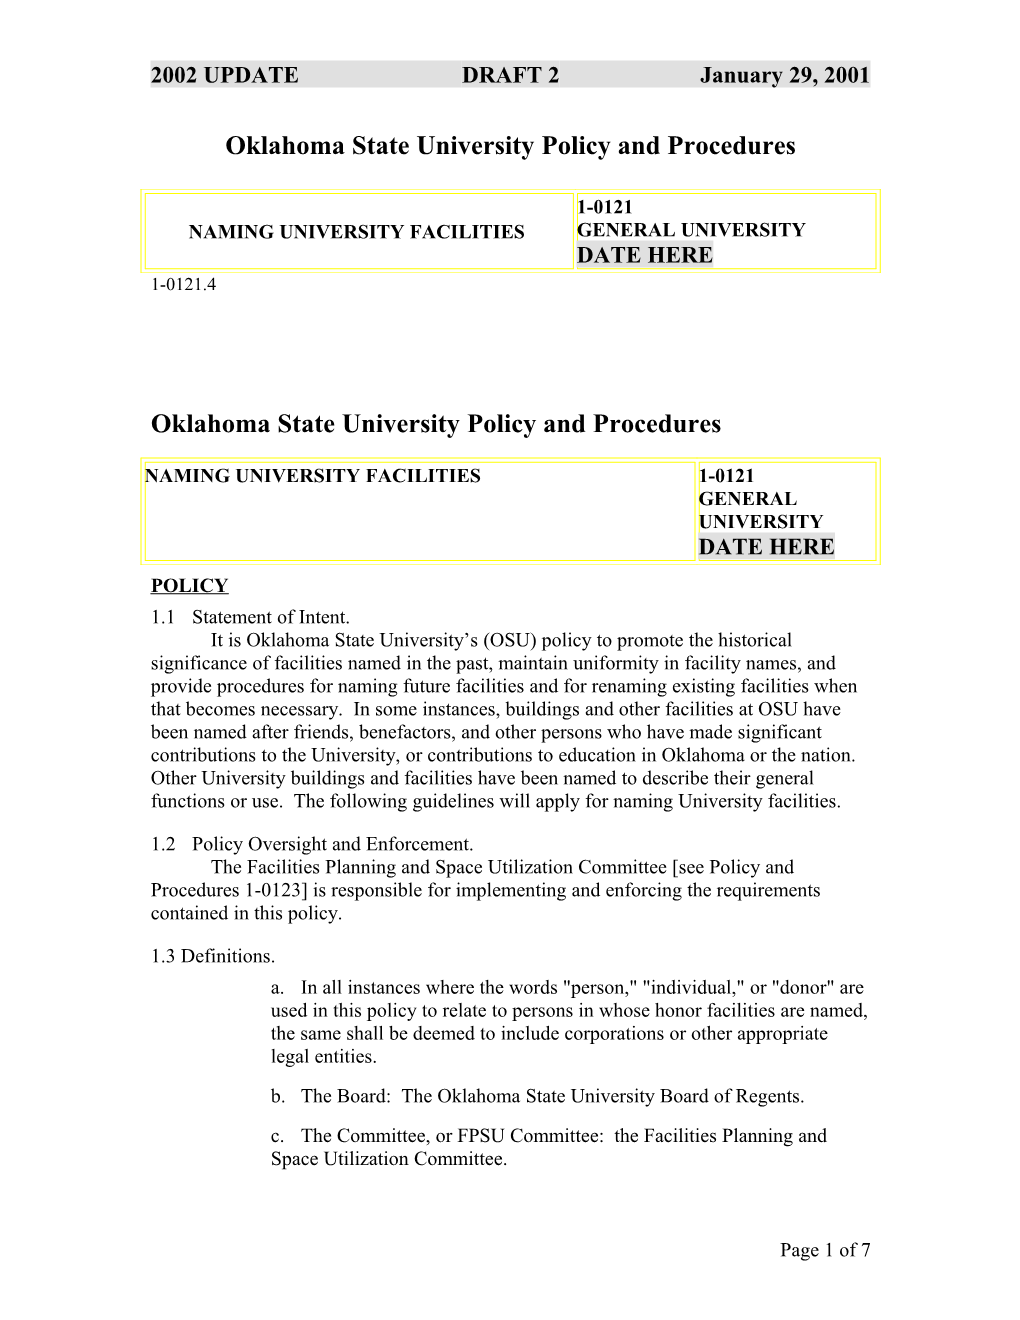 Oklahoma State University Policy and Procedures